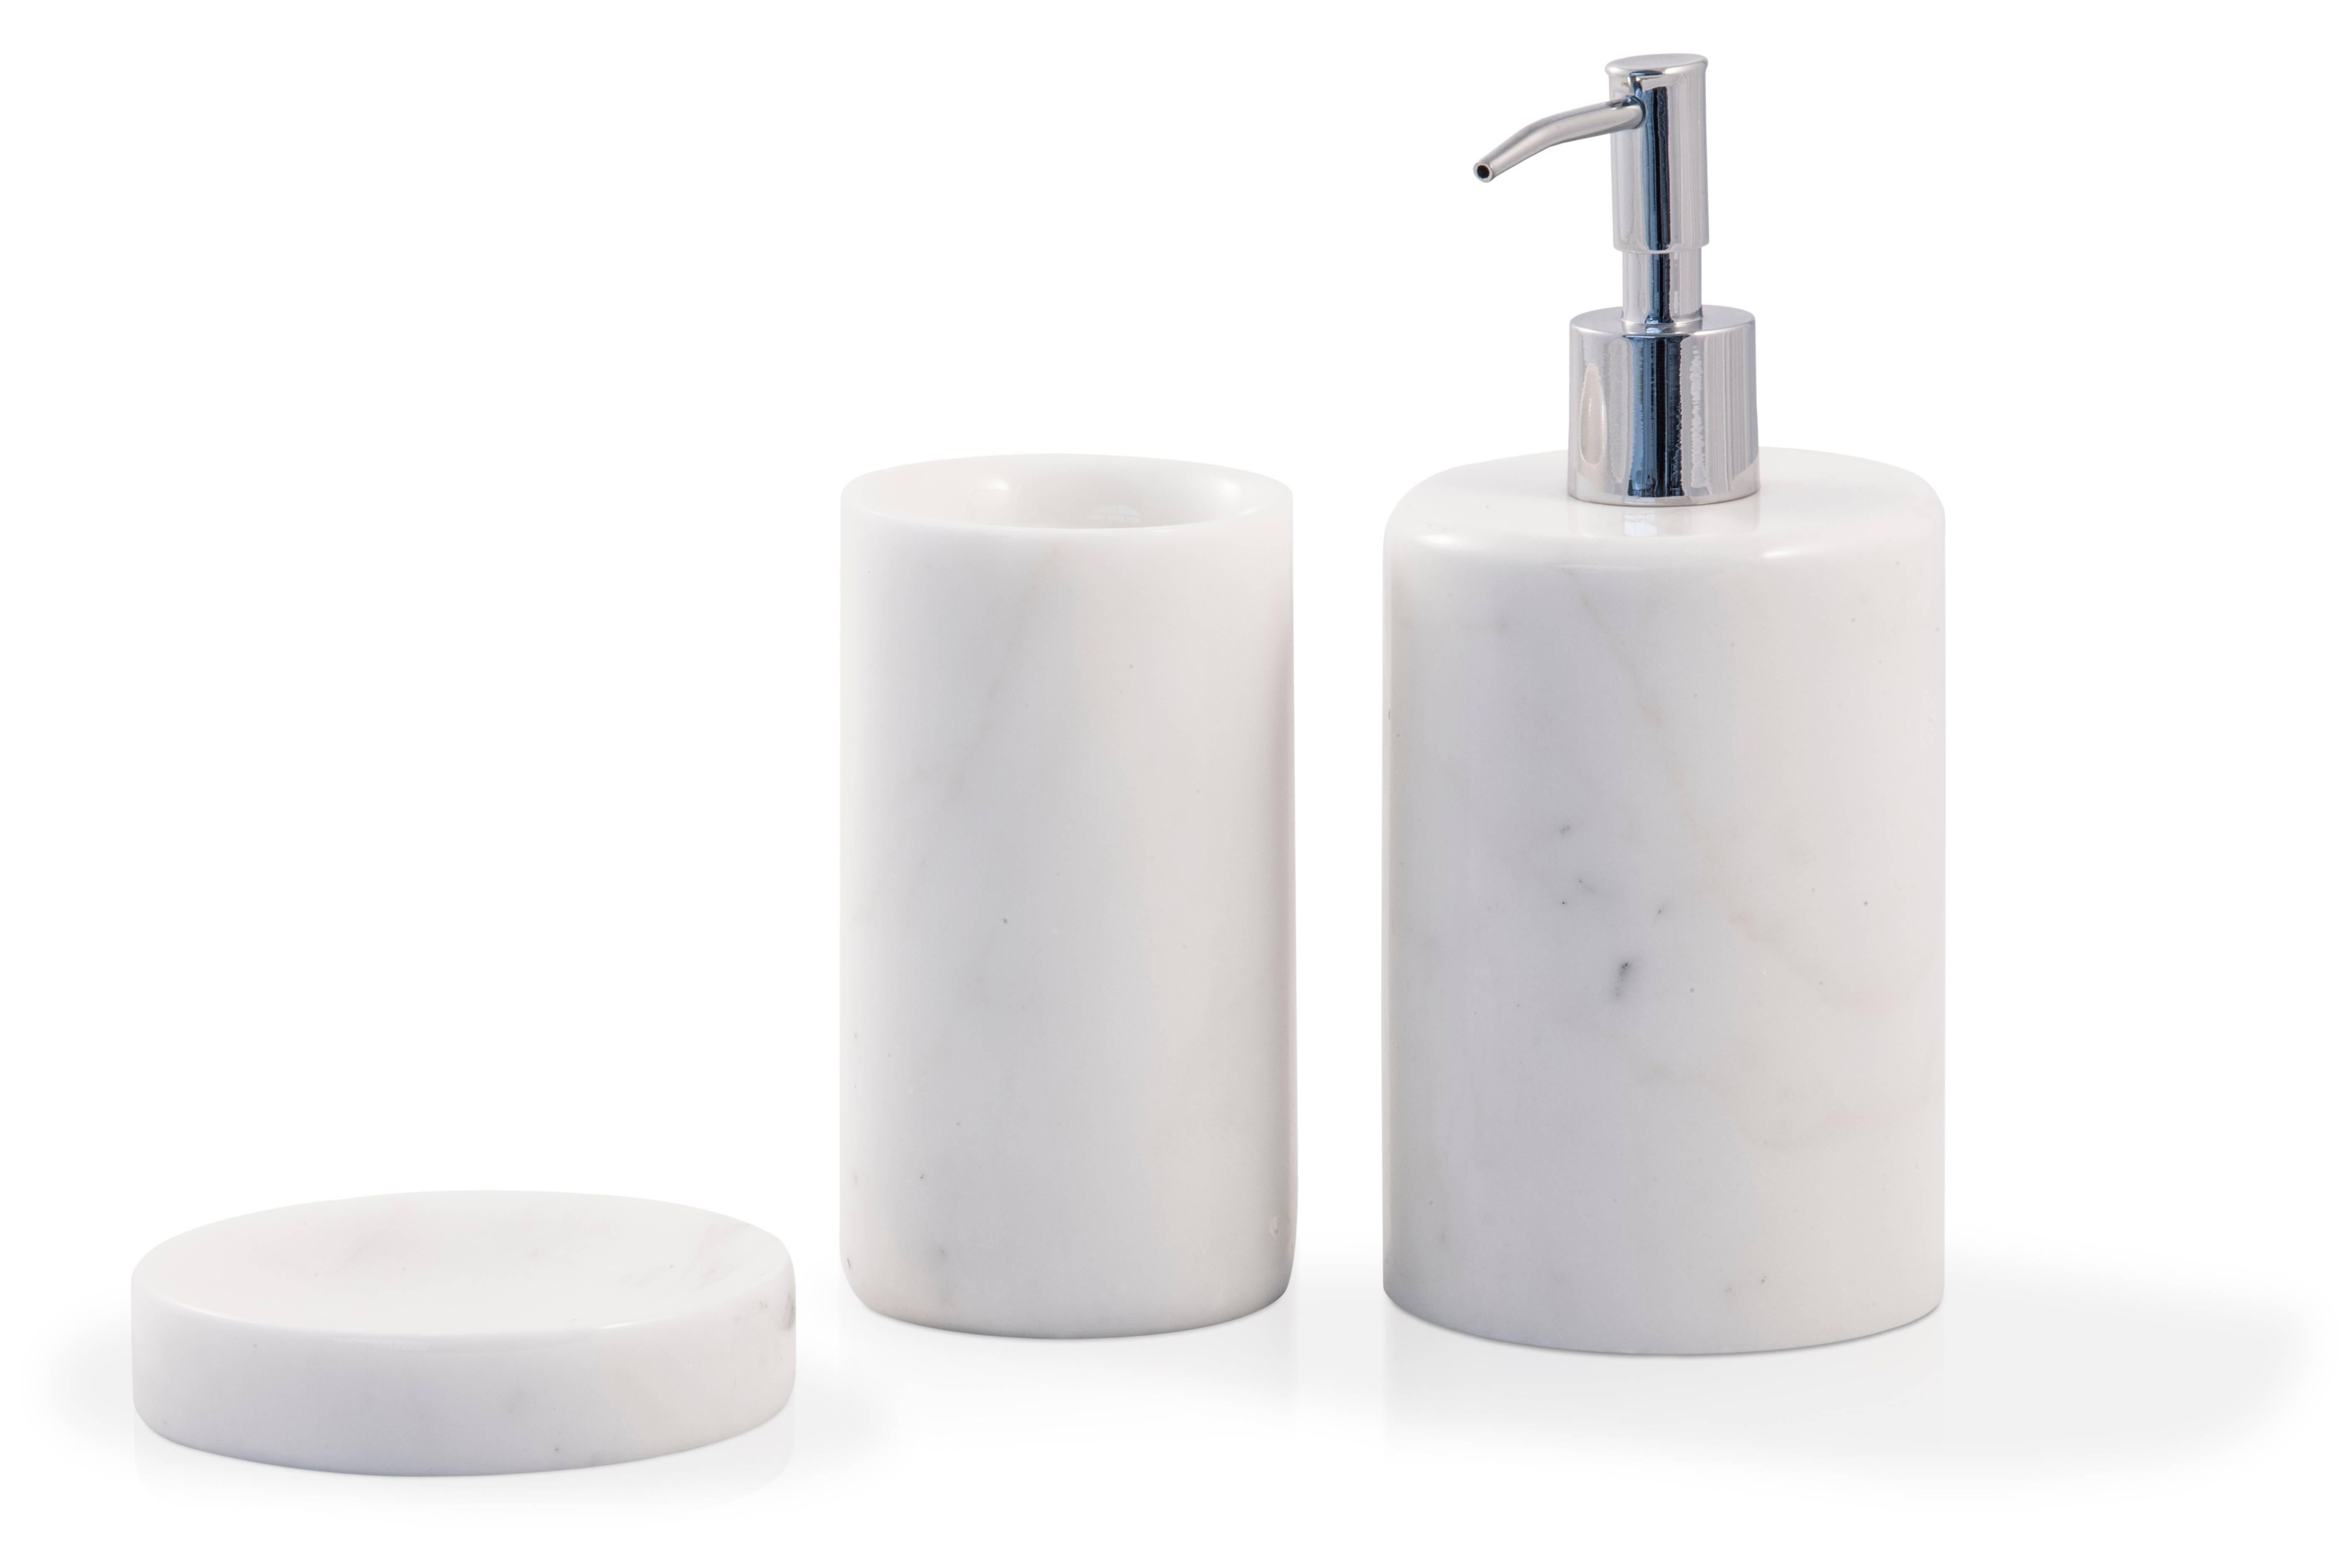 A rounded shape soap dispenser in white Carrara marble.
Each piece is in a way unique (since each marble block is different in veins and shades) and handcrafted in Italy. Slight variations in shape, color and size are to be considered a guarantee